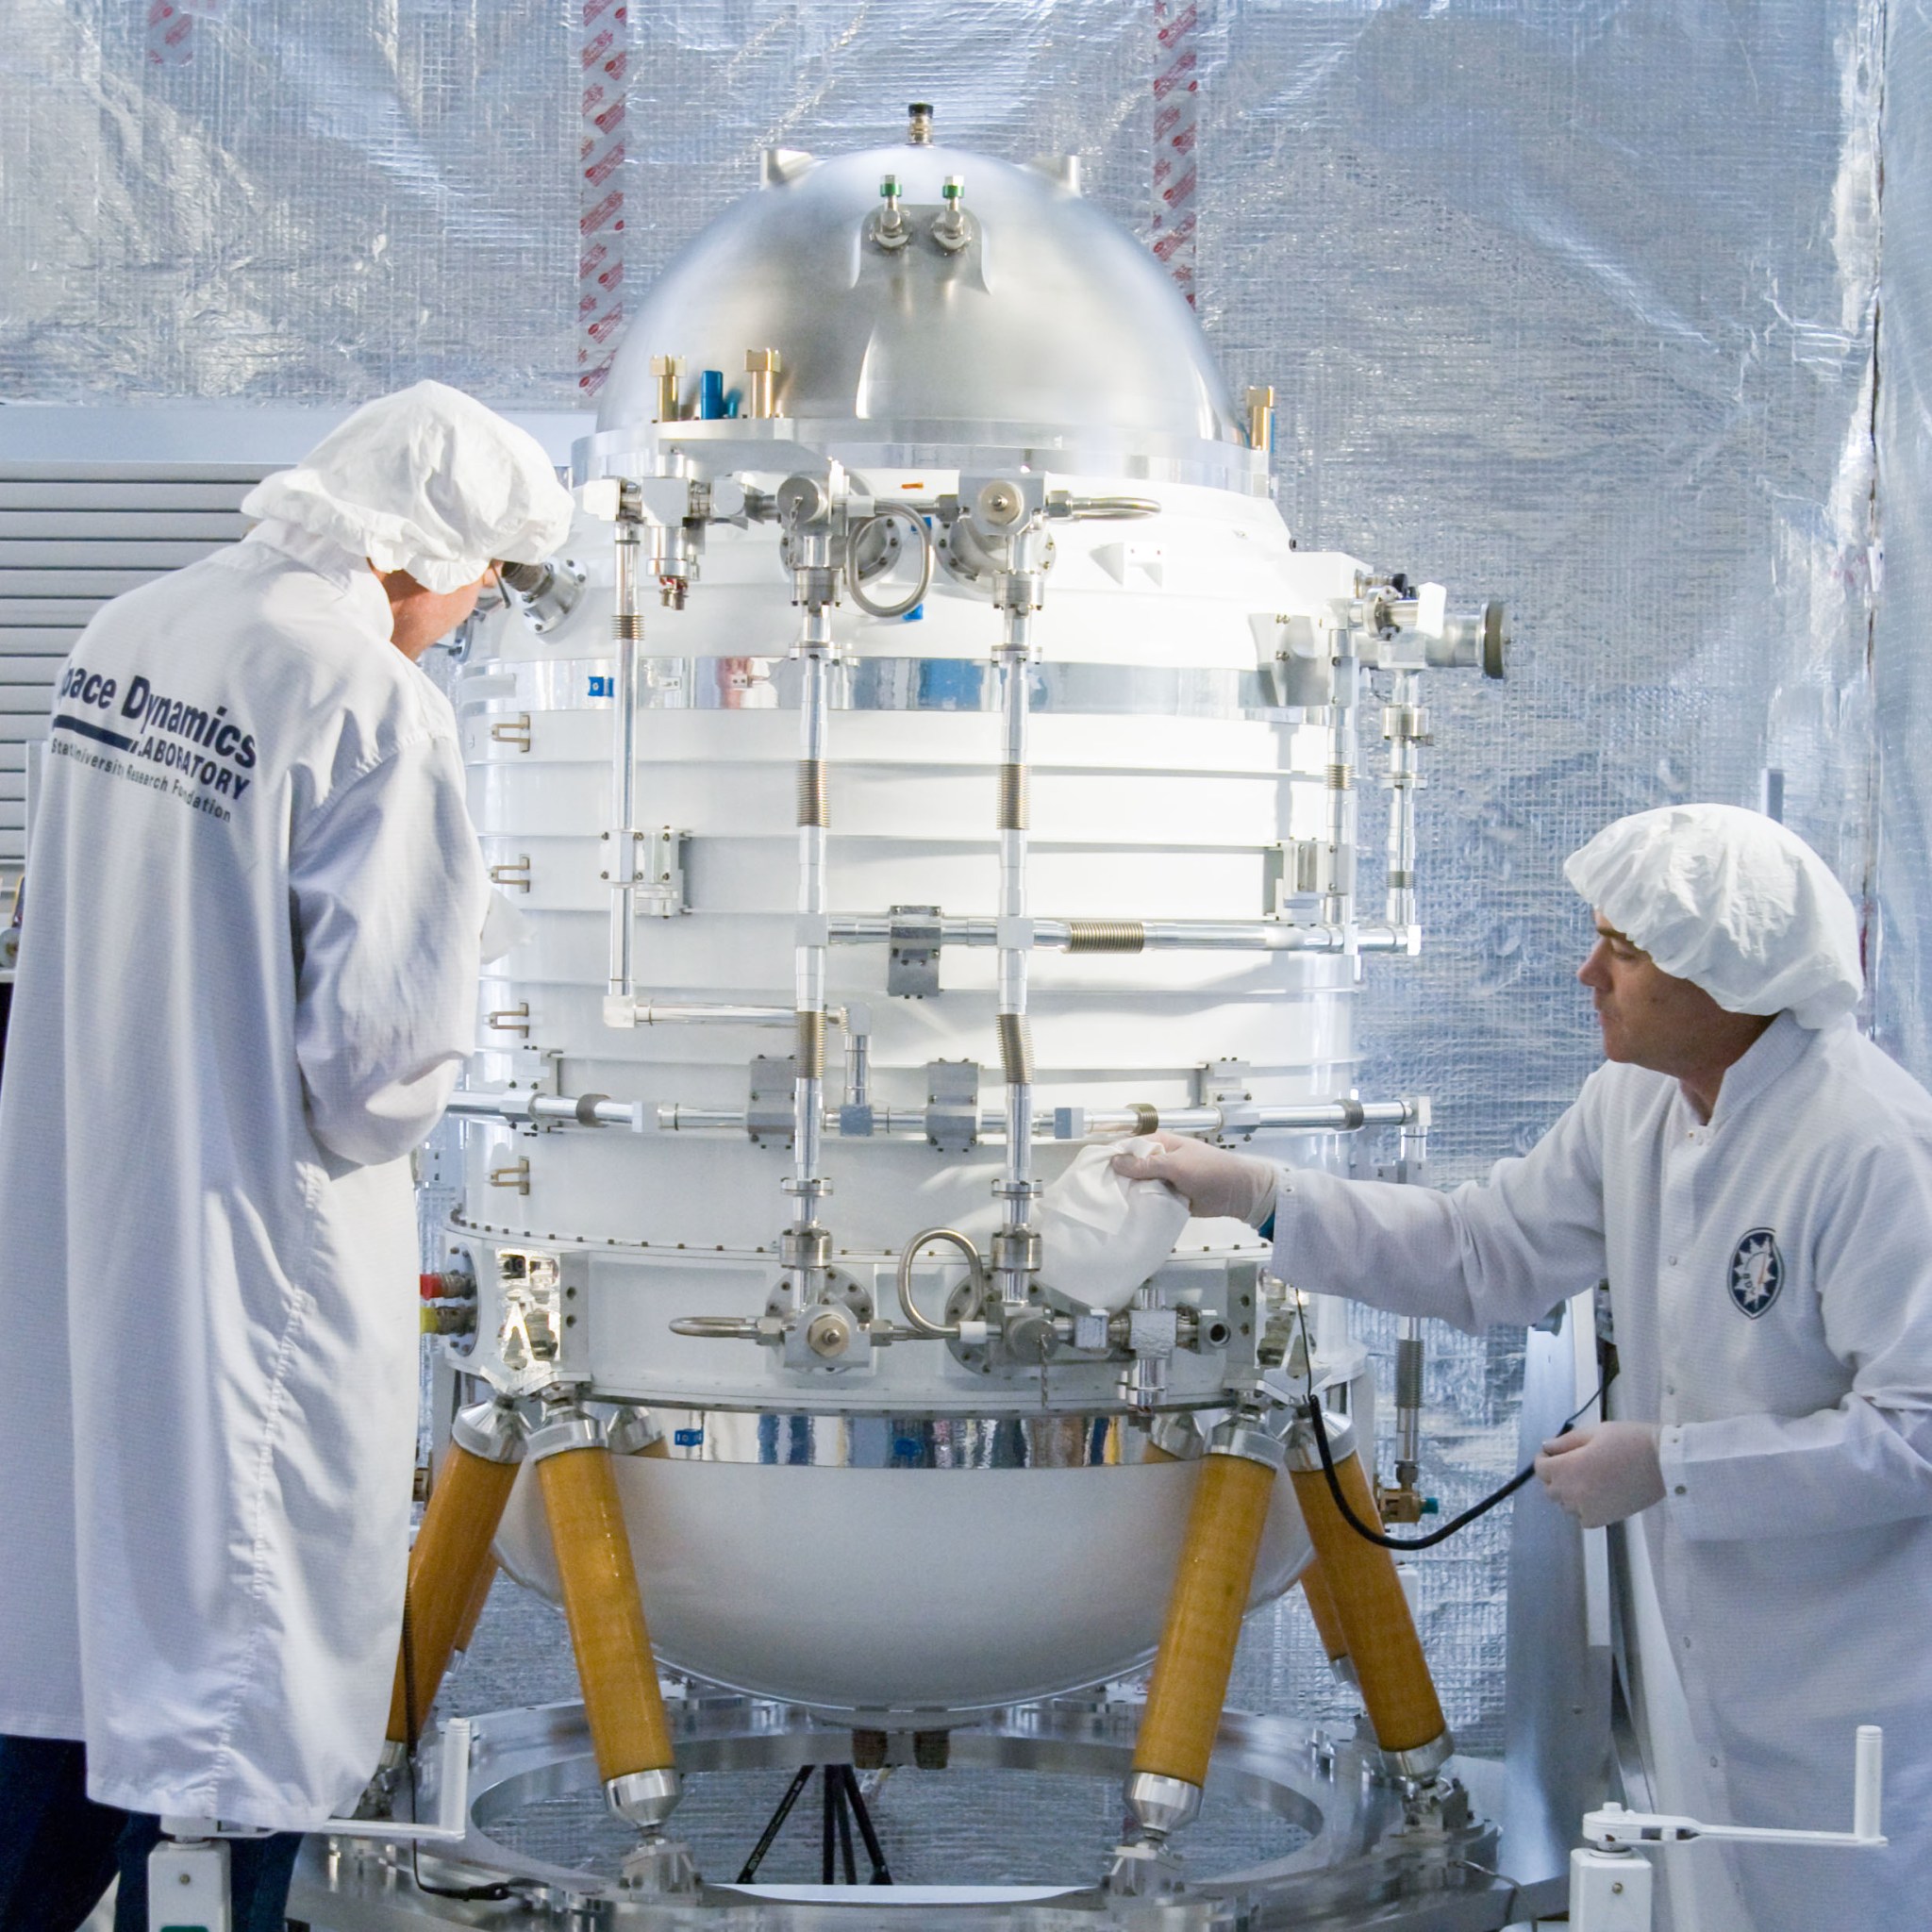 WISE mission’s telescope is worked on by engineers